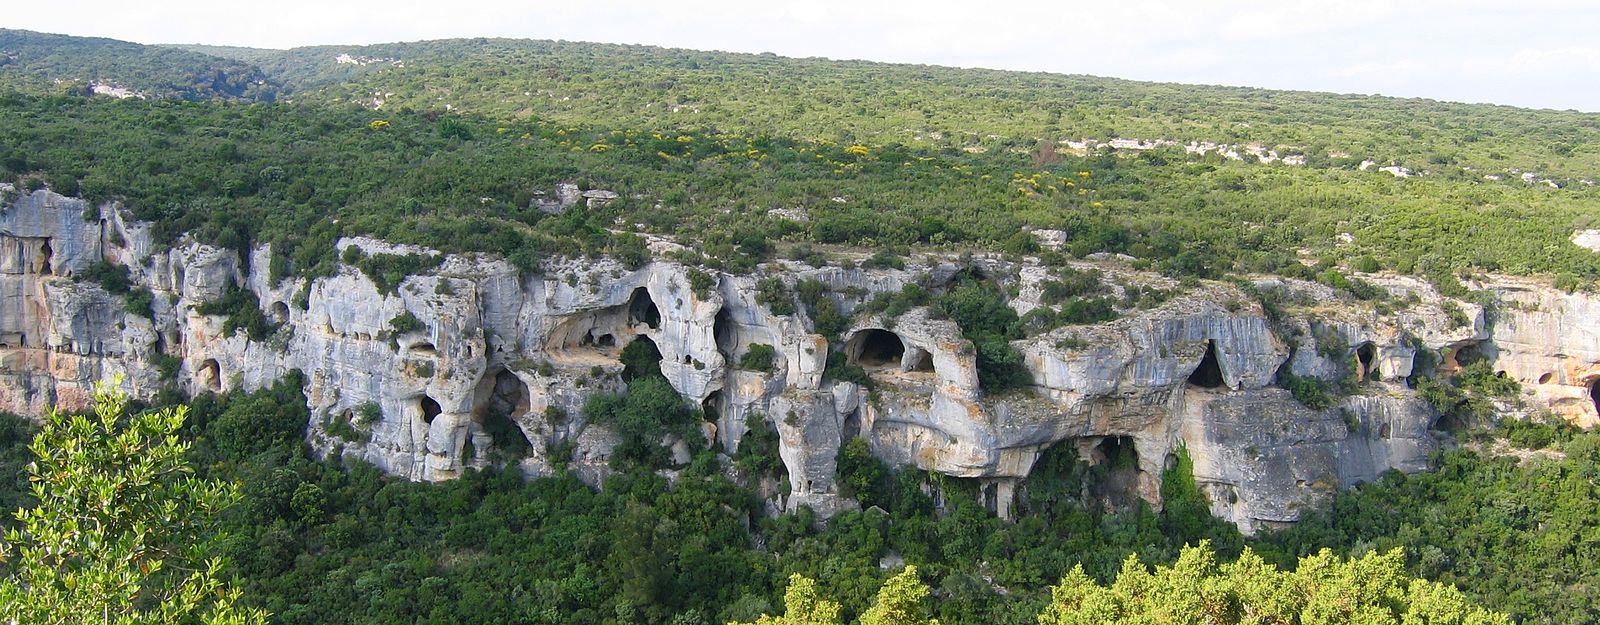 White-gray cliffside with numerous caves and holes throughout; the base and top of the cliffs are covered in green vegetation.